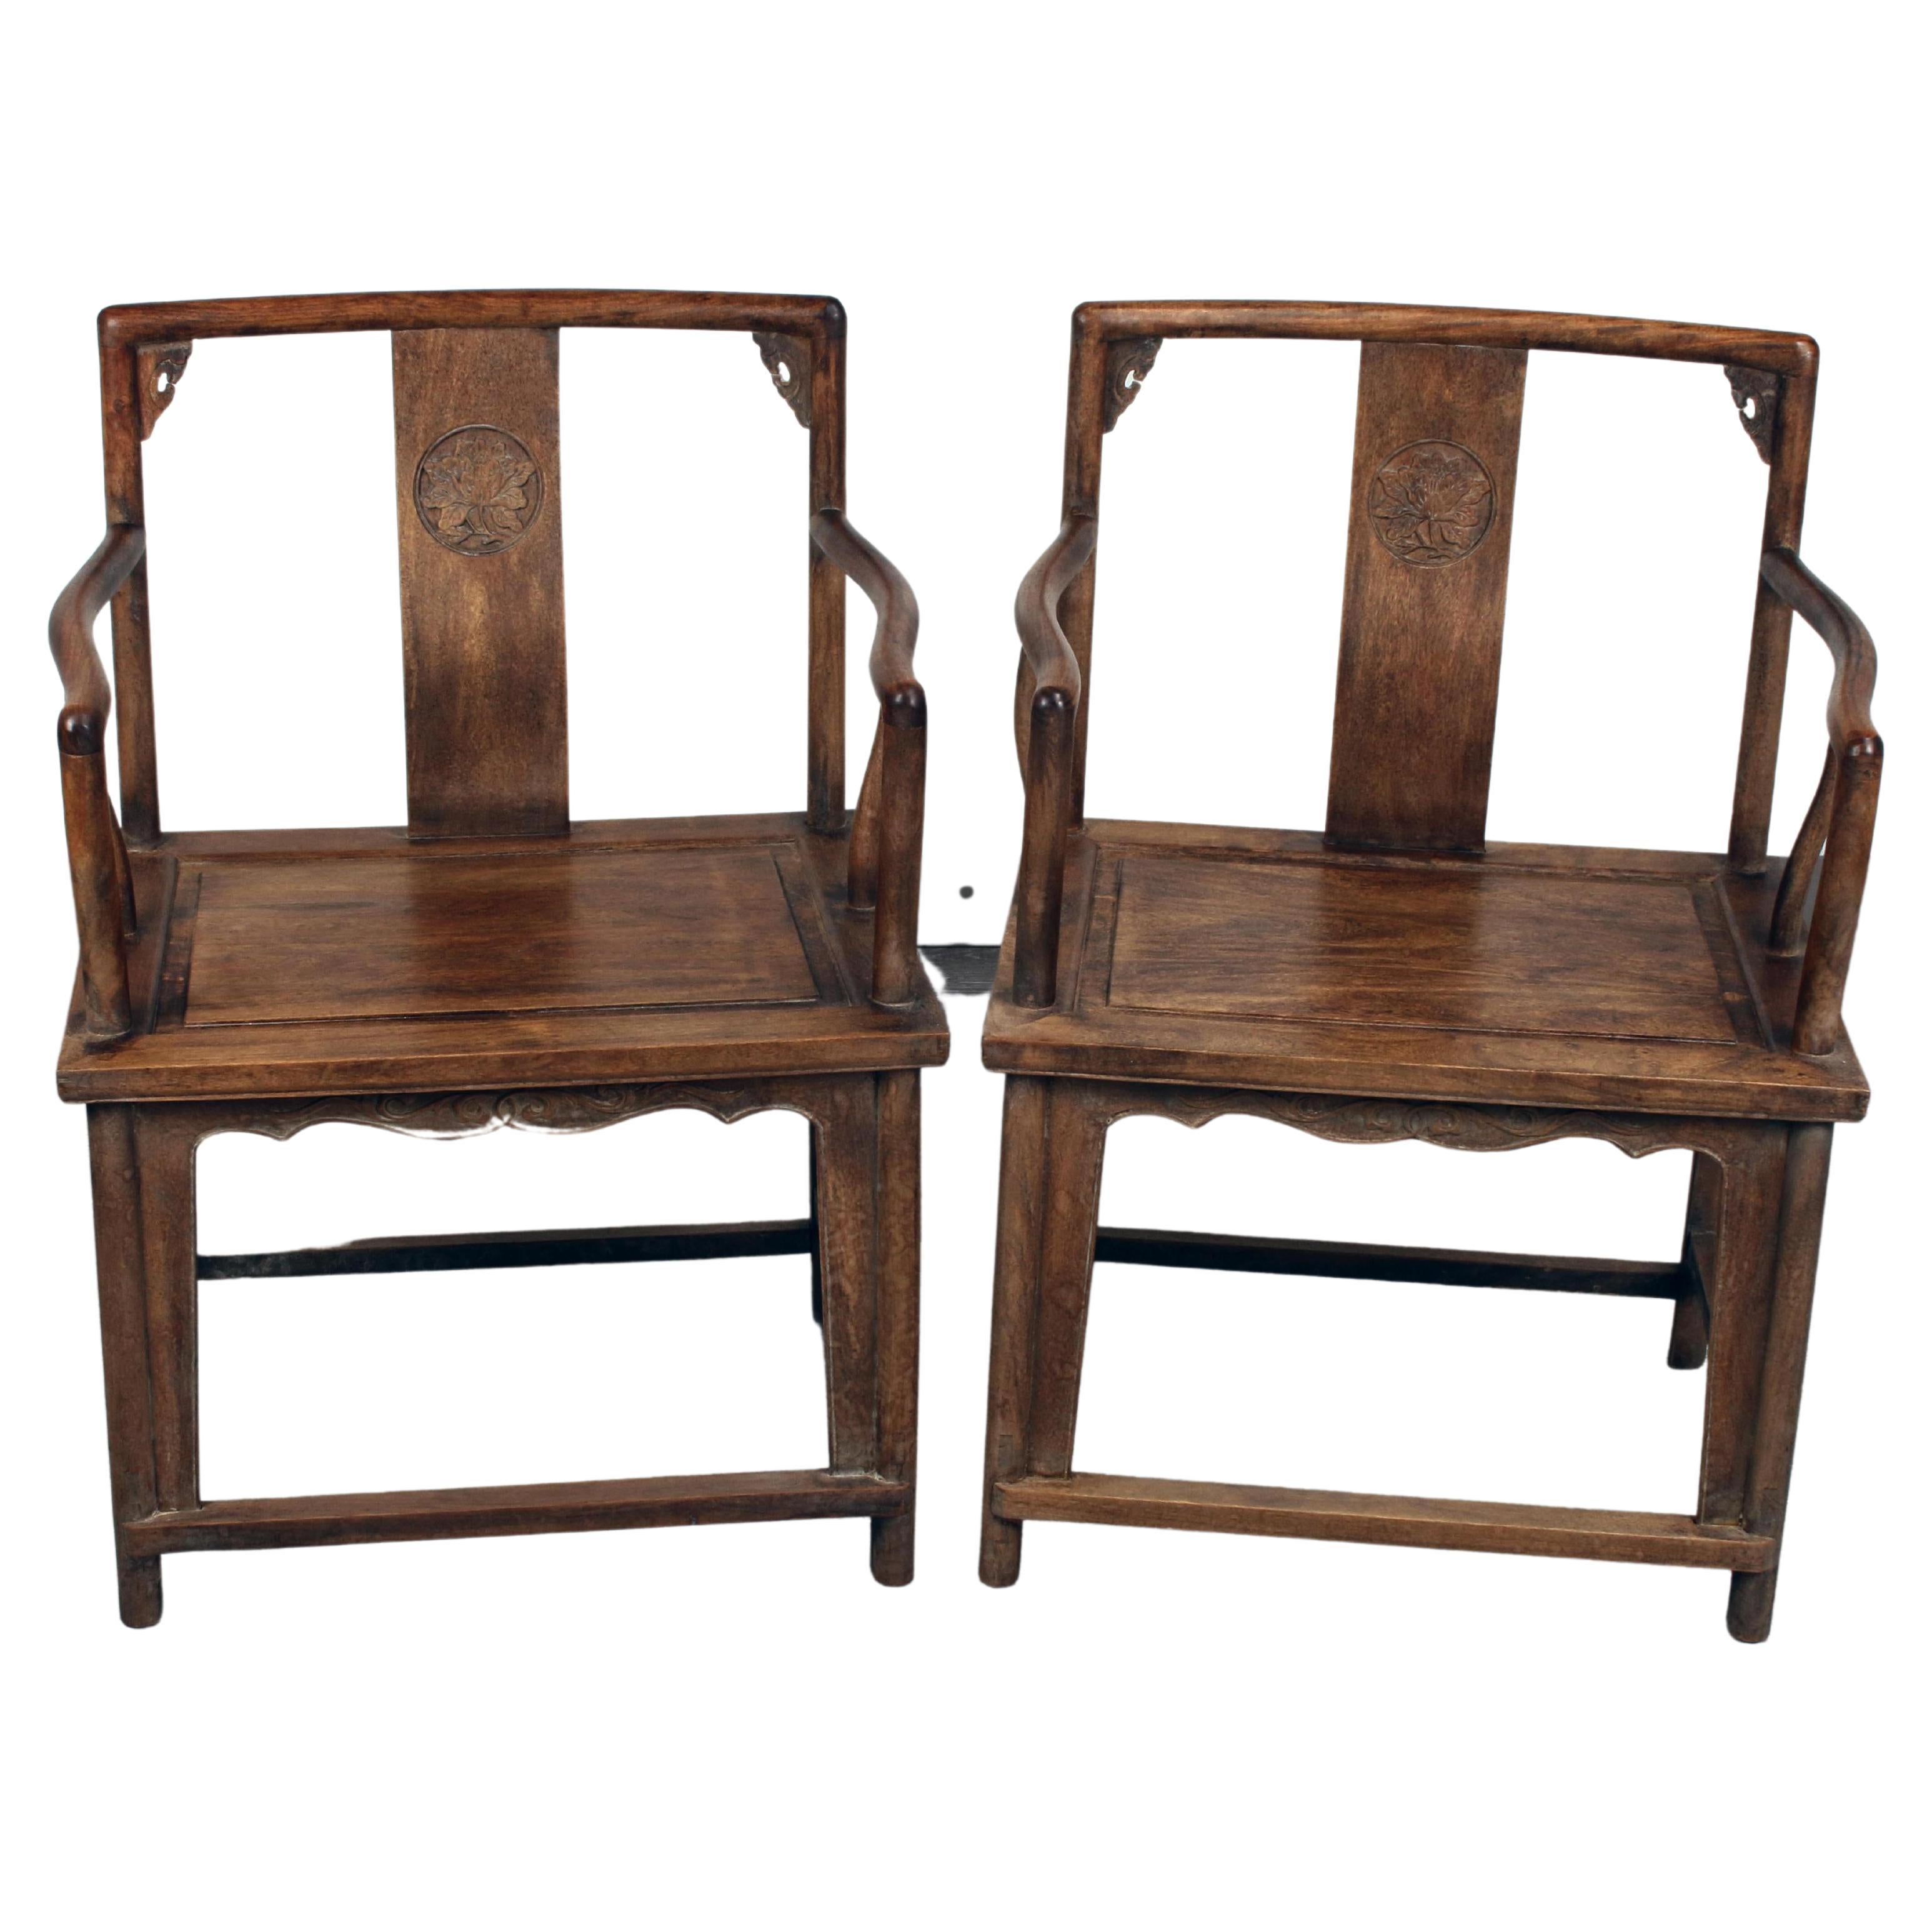 Pair of Chinese Huanghuali Arm Chairs